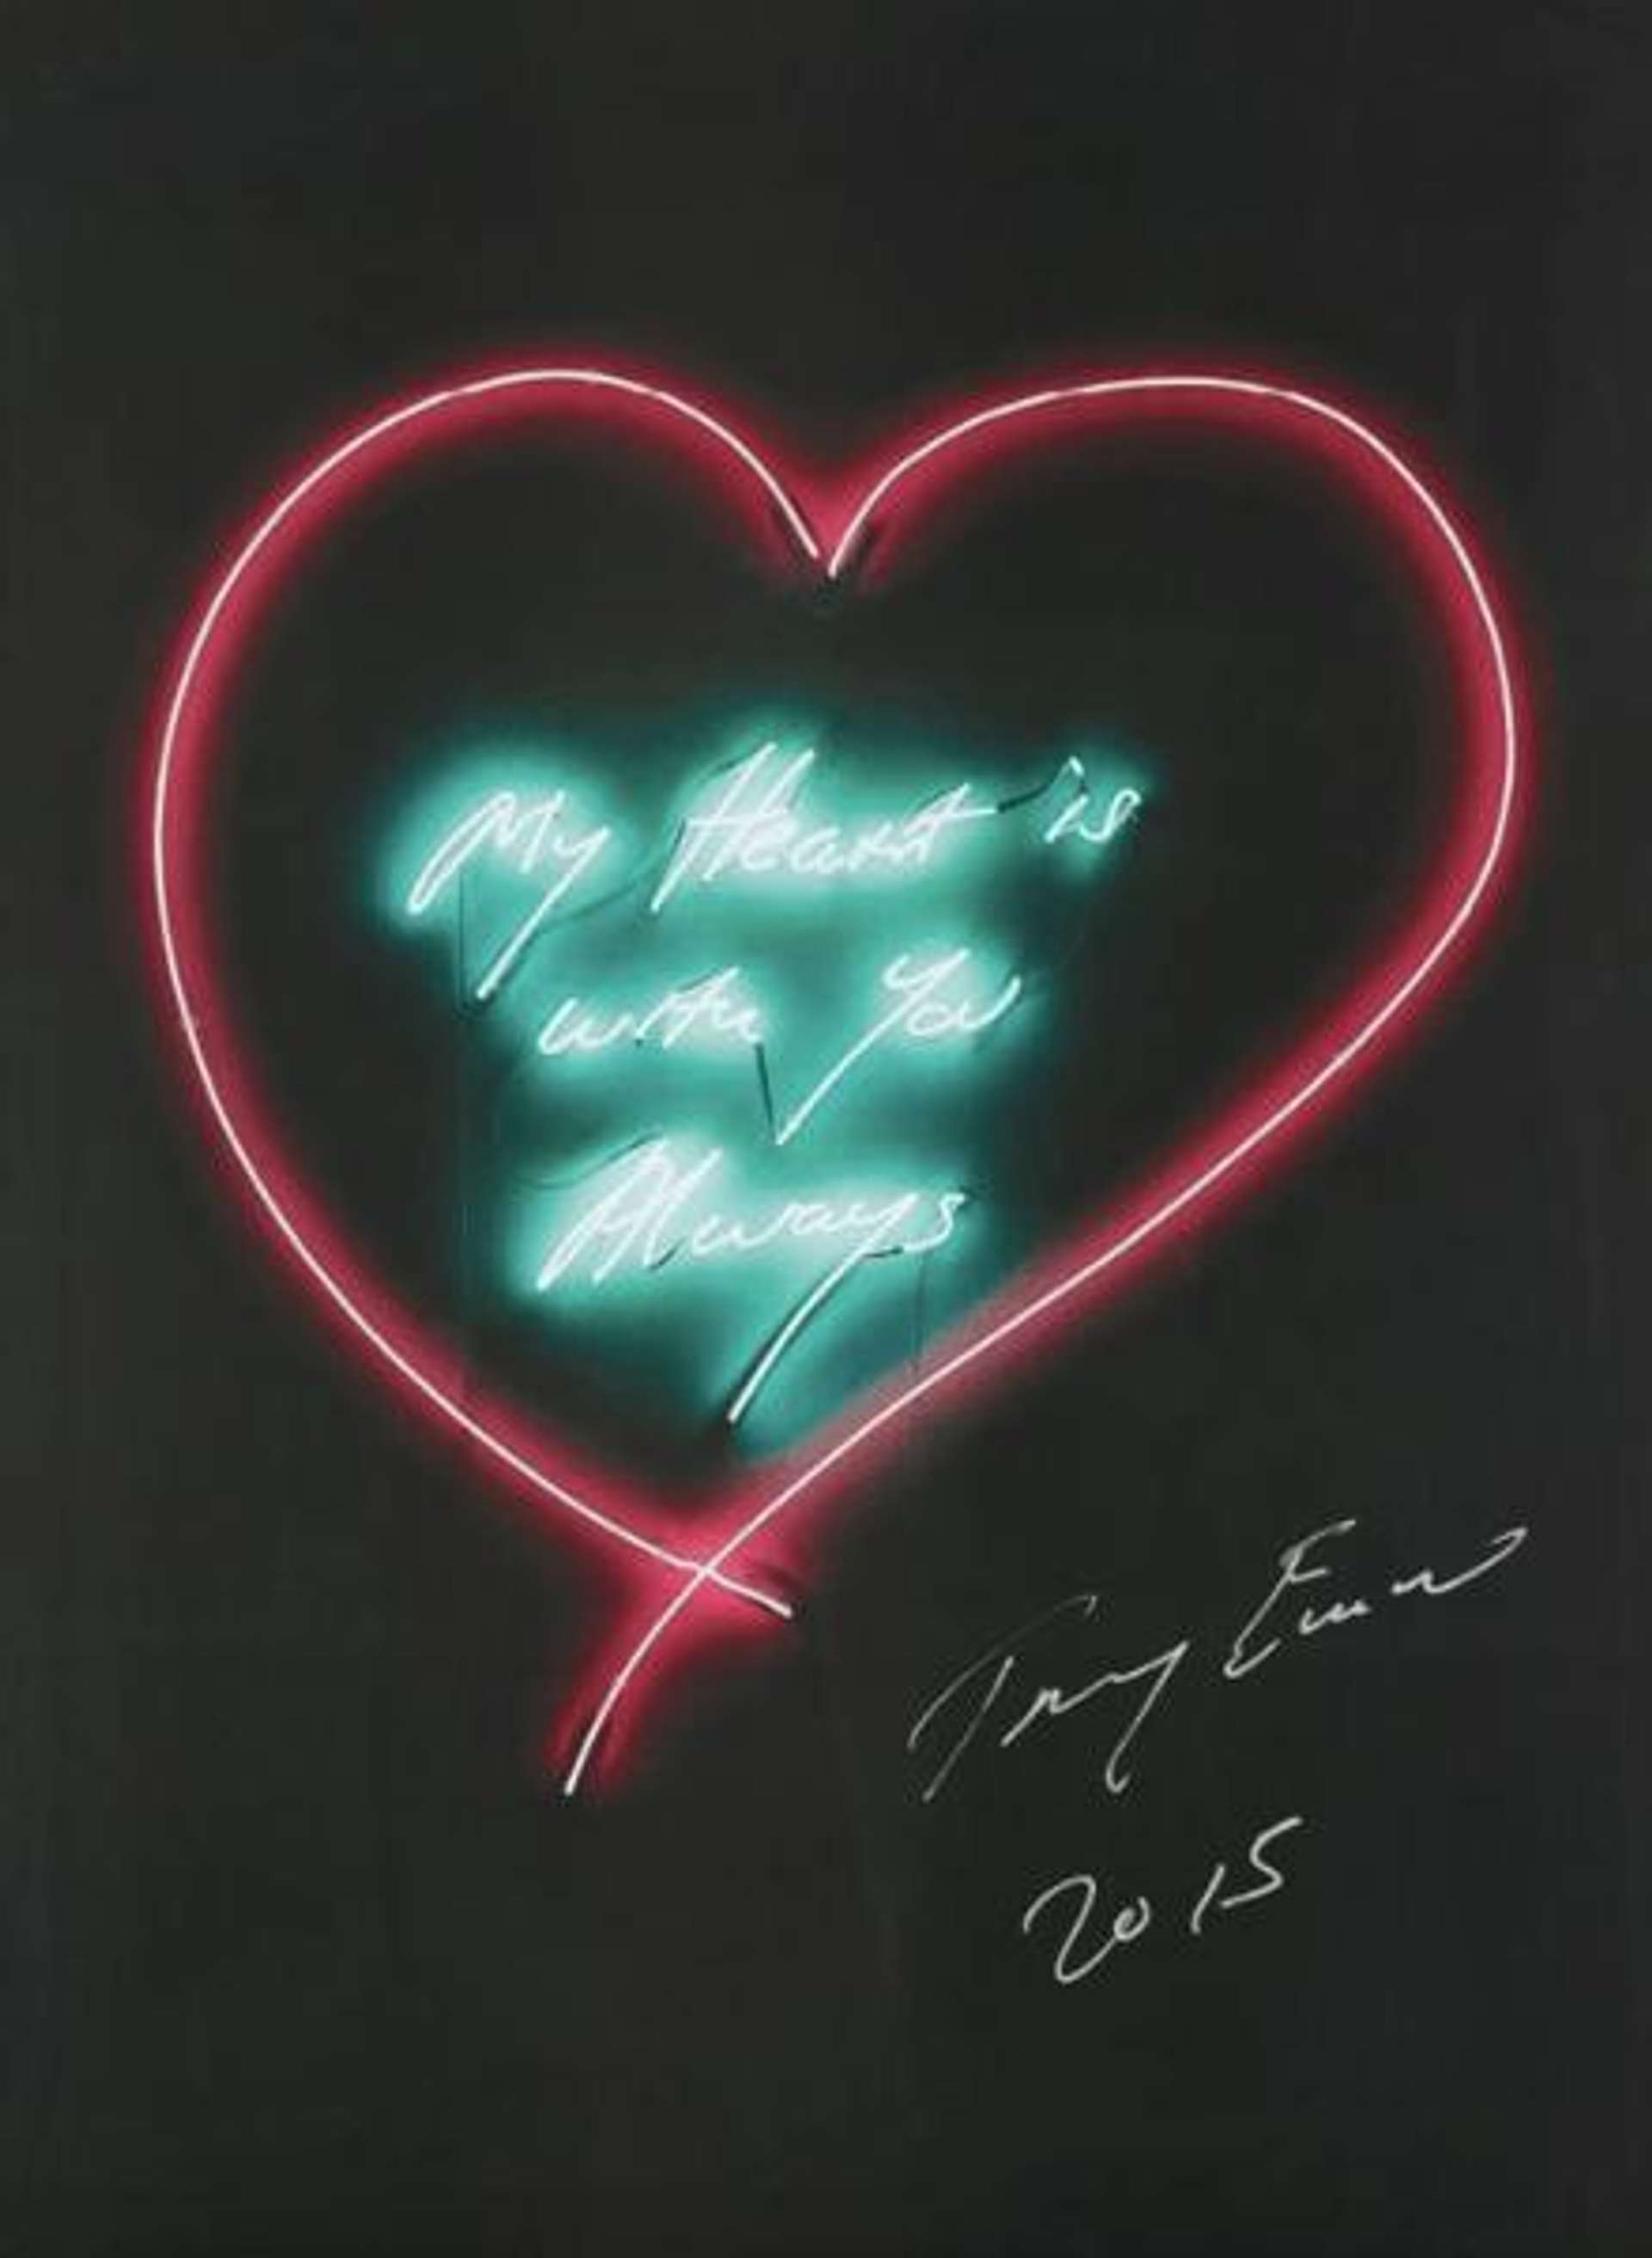 The lithograph shows a neon heart encapsulating Emin’s own handwriting, which reads “my heart is with you always”.